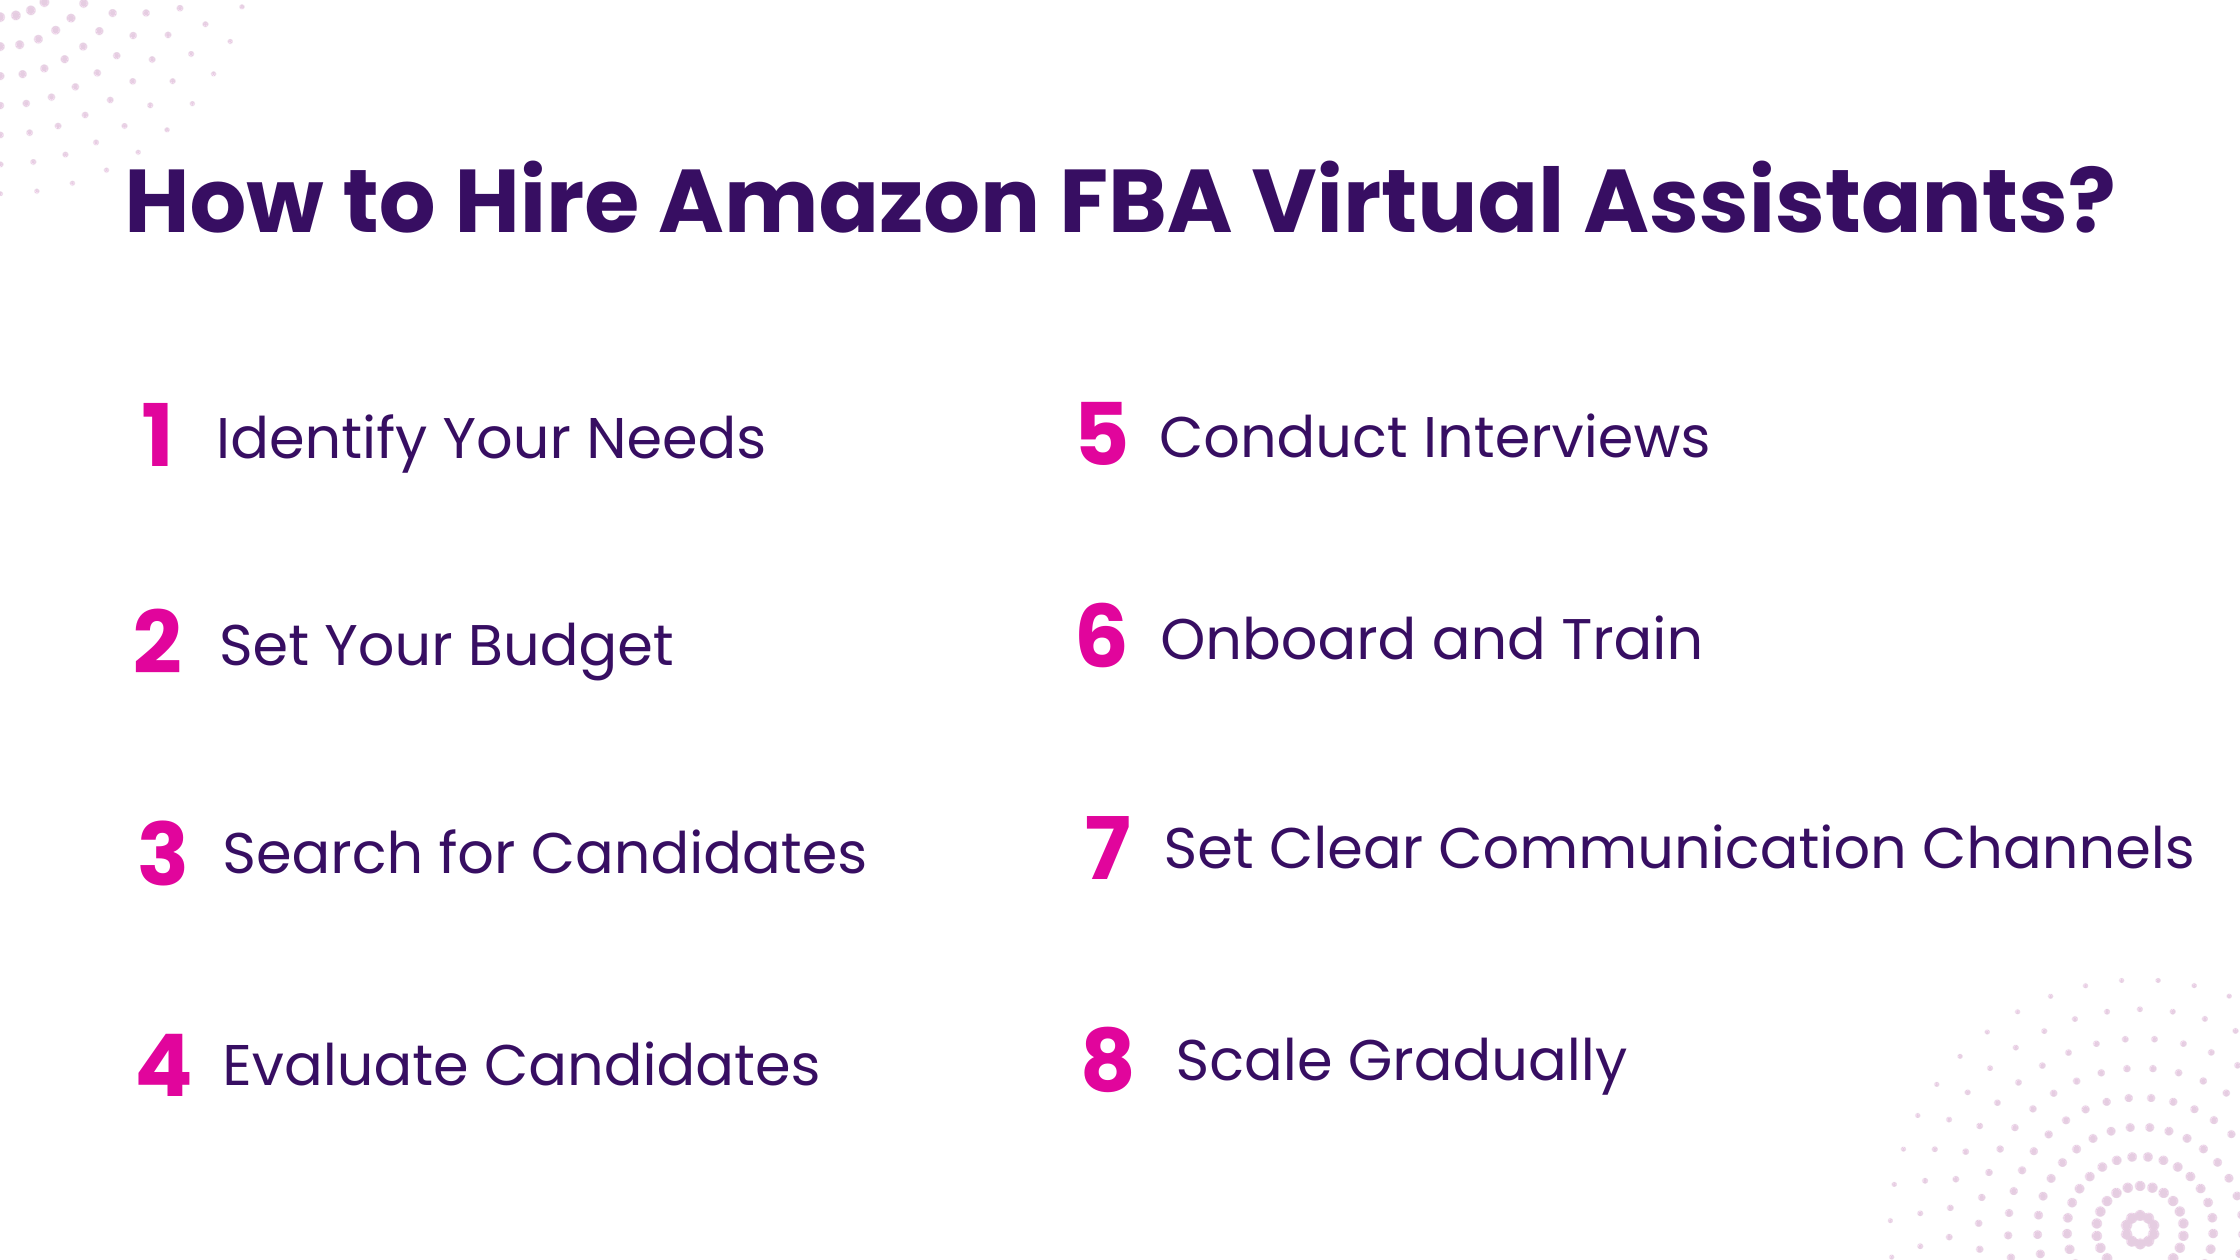 How to Hire Amazon FBA Virtual Assistants